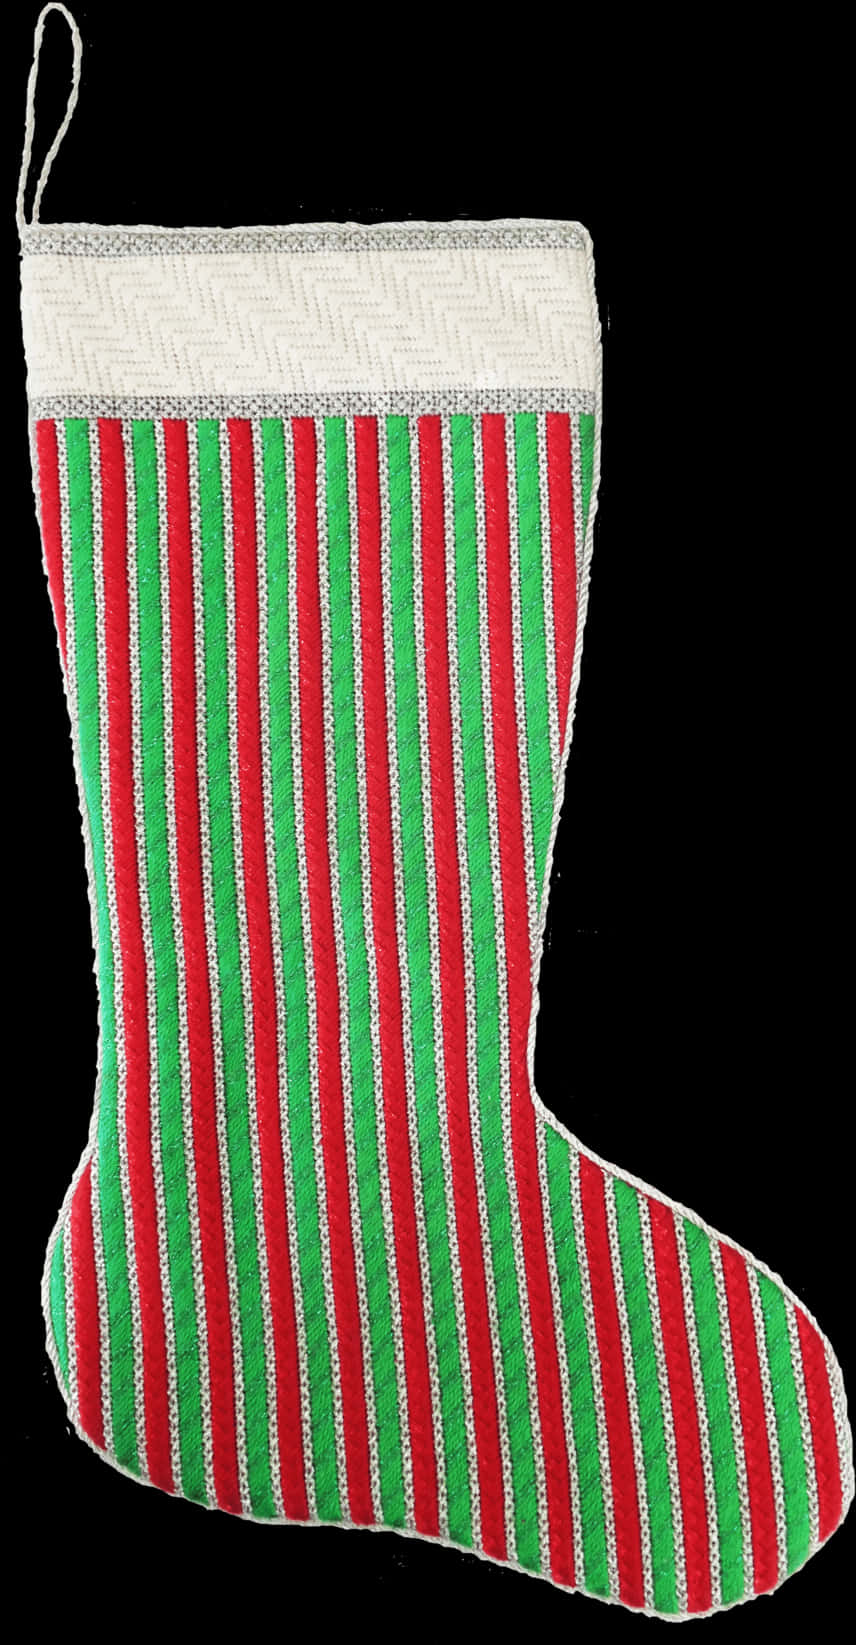 A Red And Green Striped Stocking